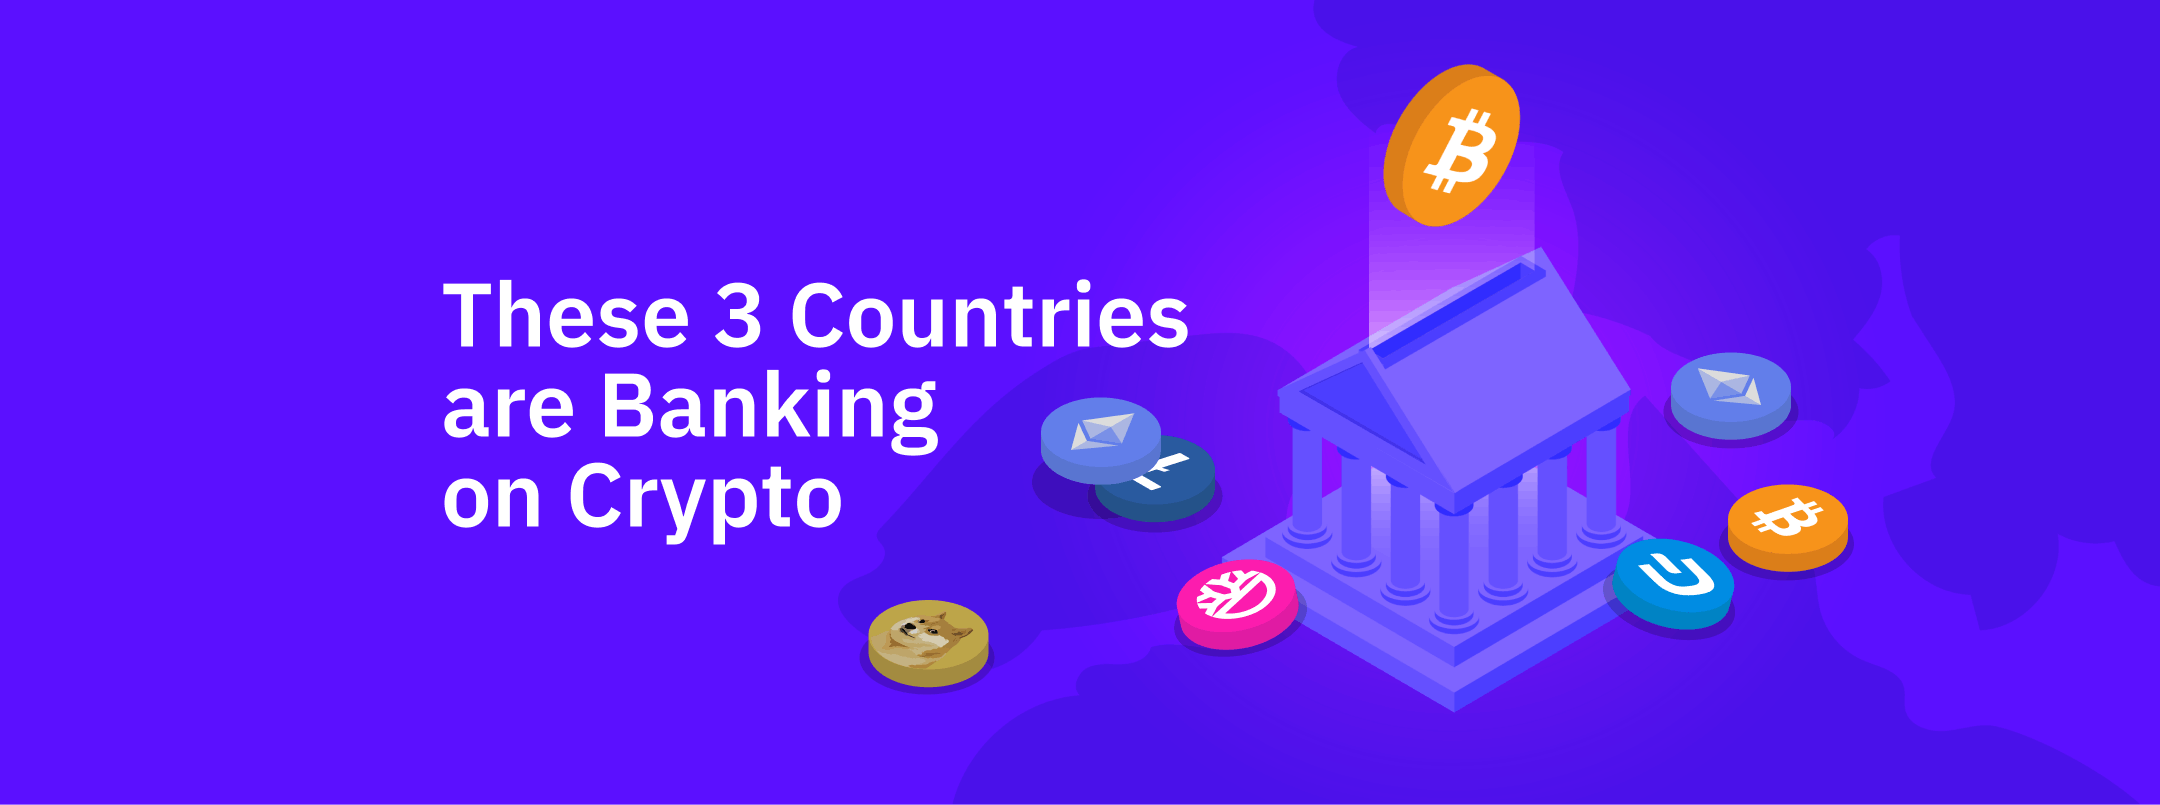 Most Crypto-Friendly Countries: The Three Countries Banking on Crypto